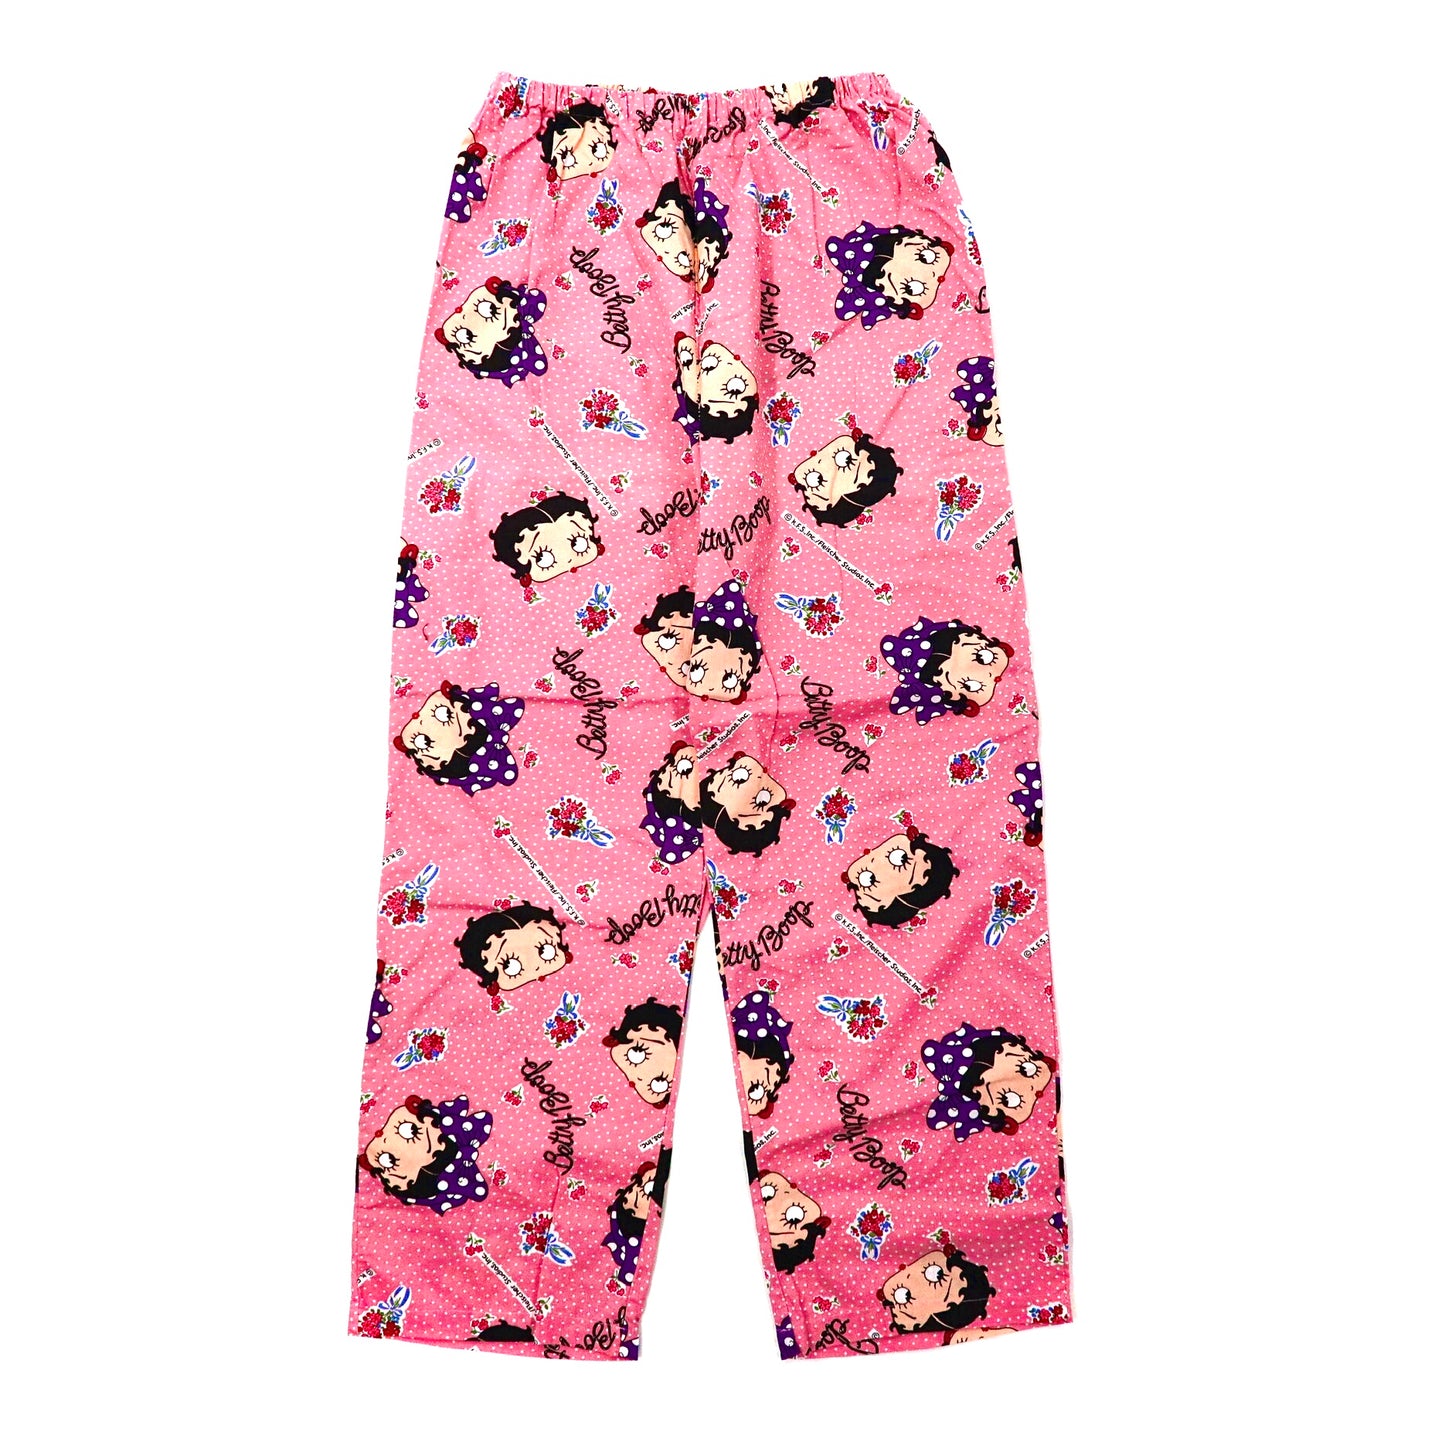 BETTY BOOP Pajamas Easy Setup L Pink Cotton Patterned Betty Boop ...